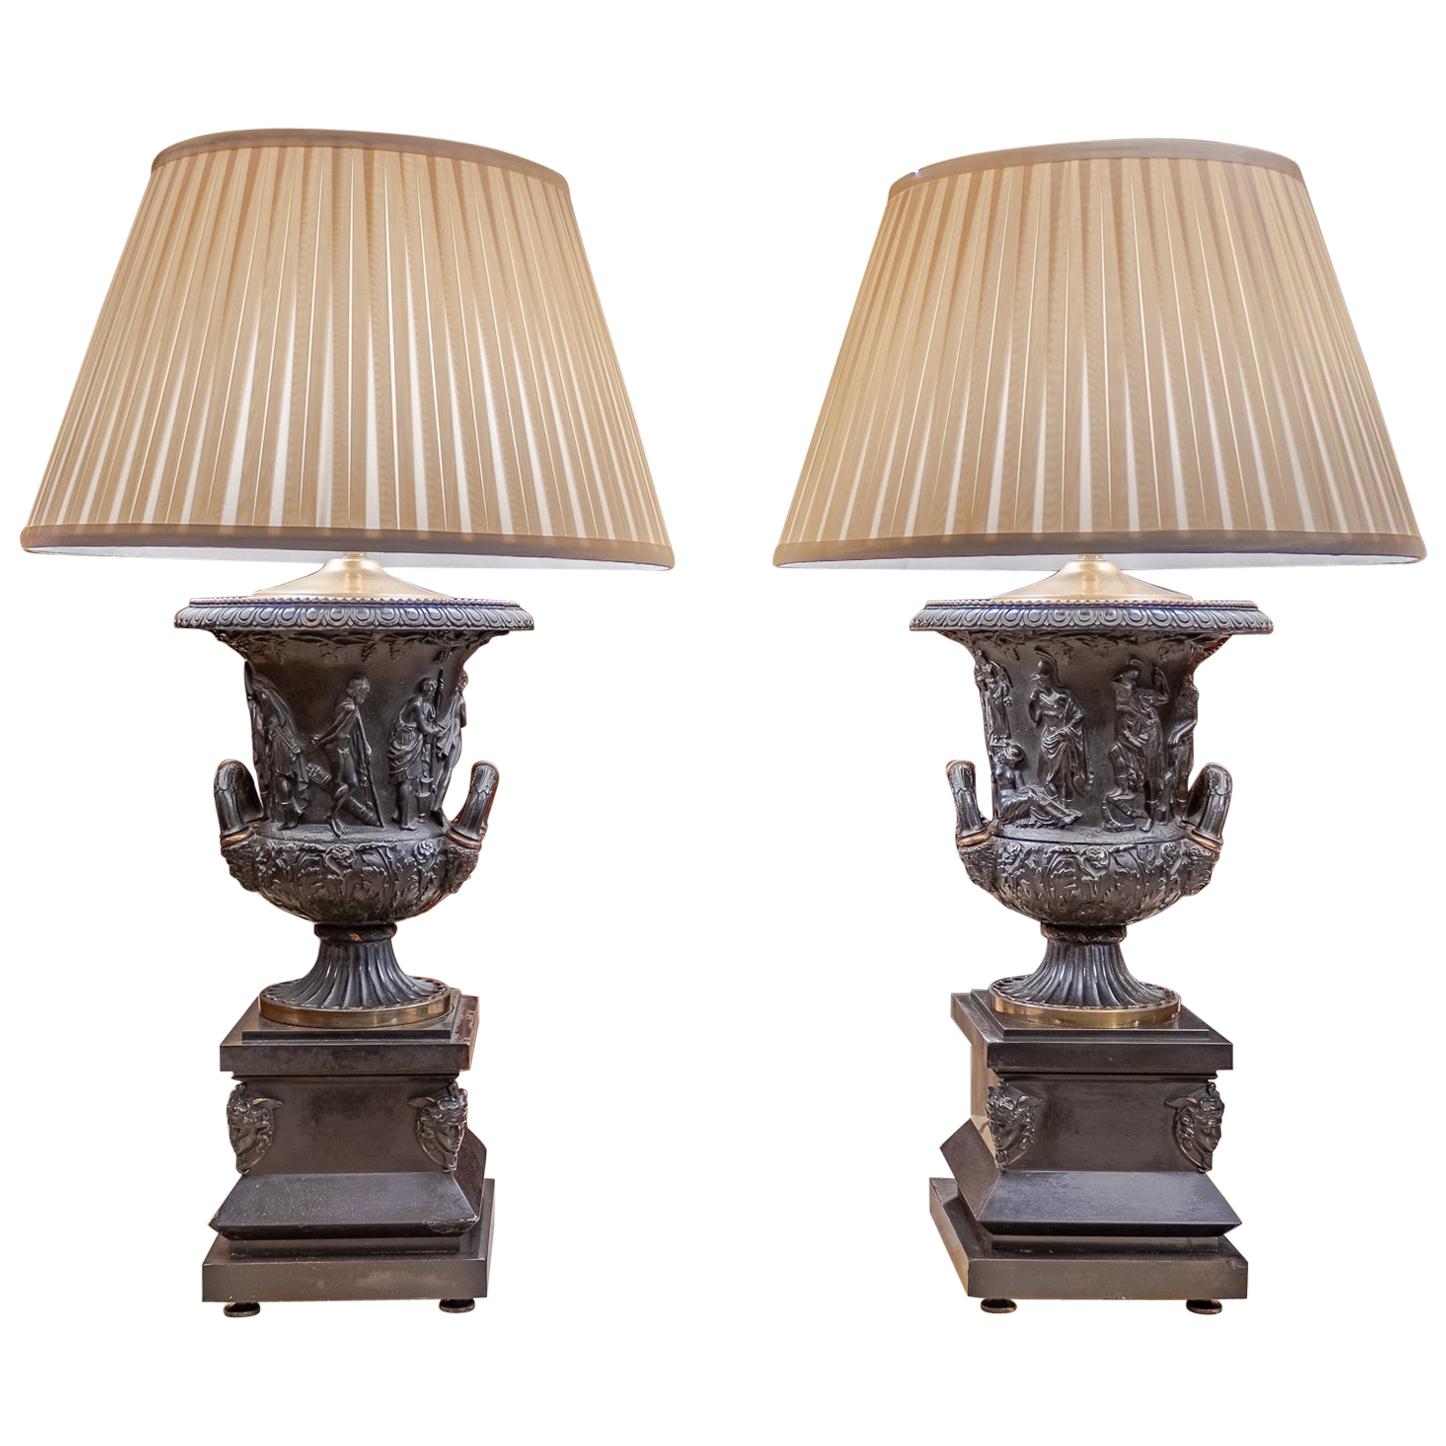 19th Century French Neoclassical Patinated Bronze Urn Lamps after Barbedienne For Sale